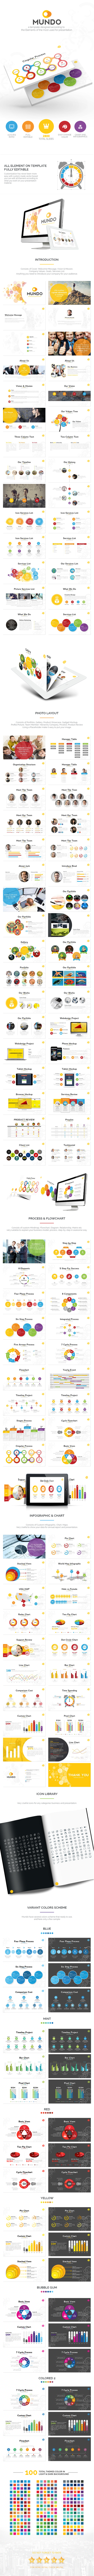 Mundo Powerpoint - Conquered Your Presentations